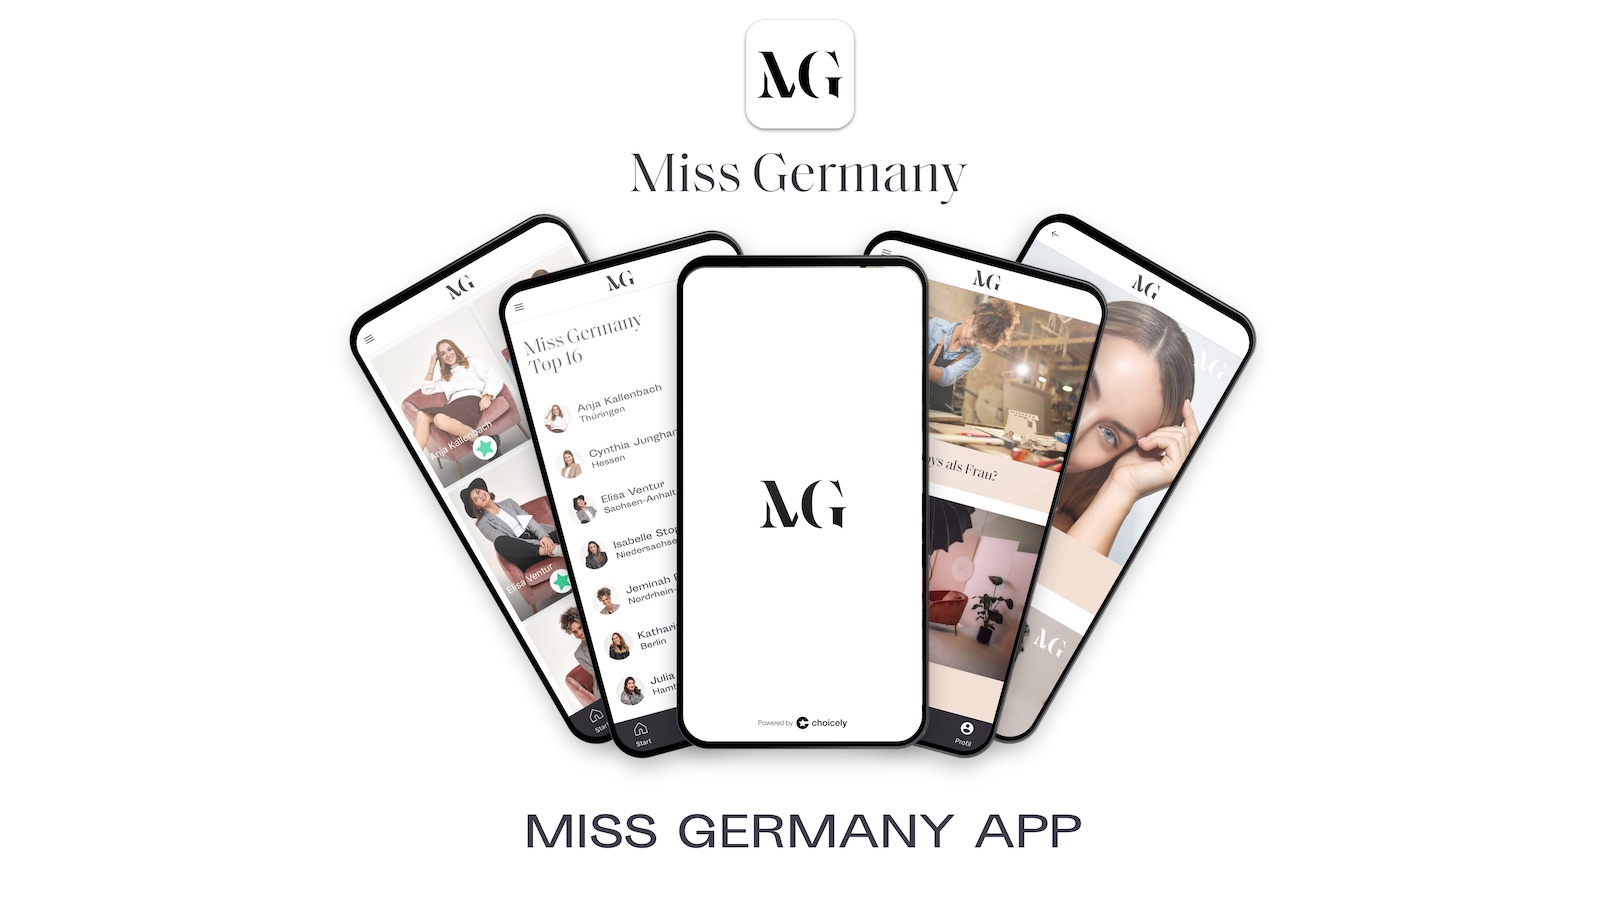 Phones with Miss Germany screenshots